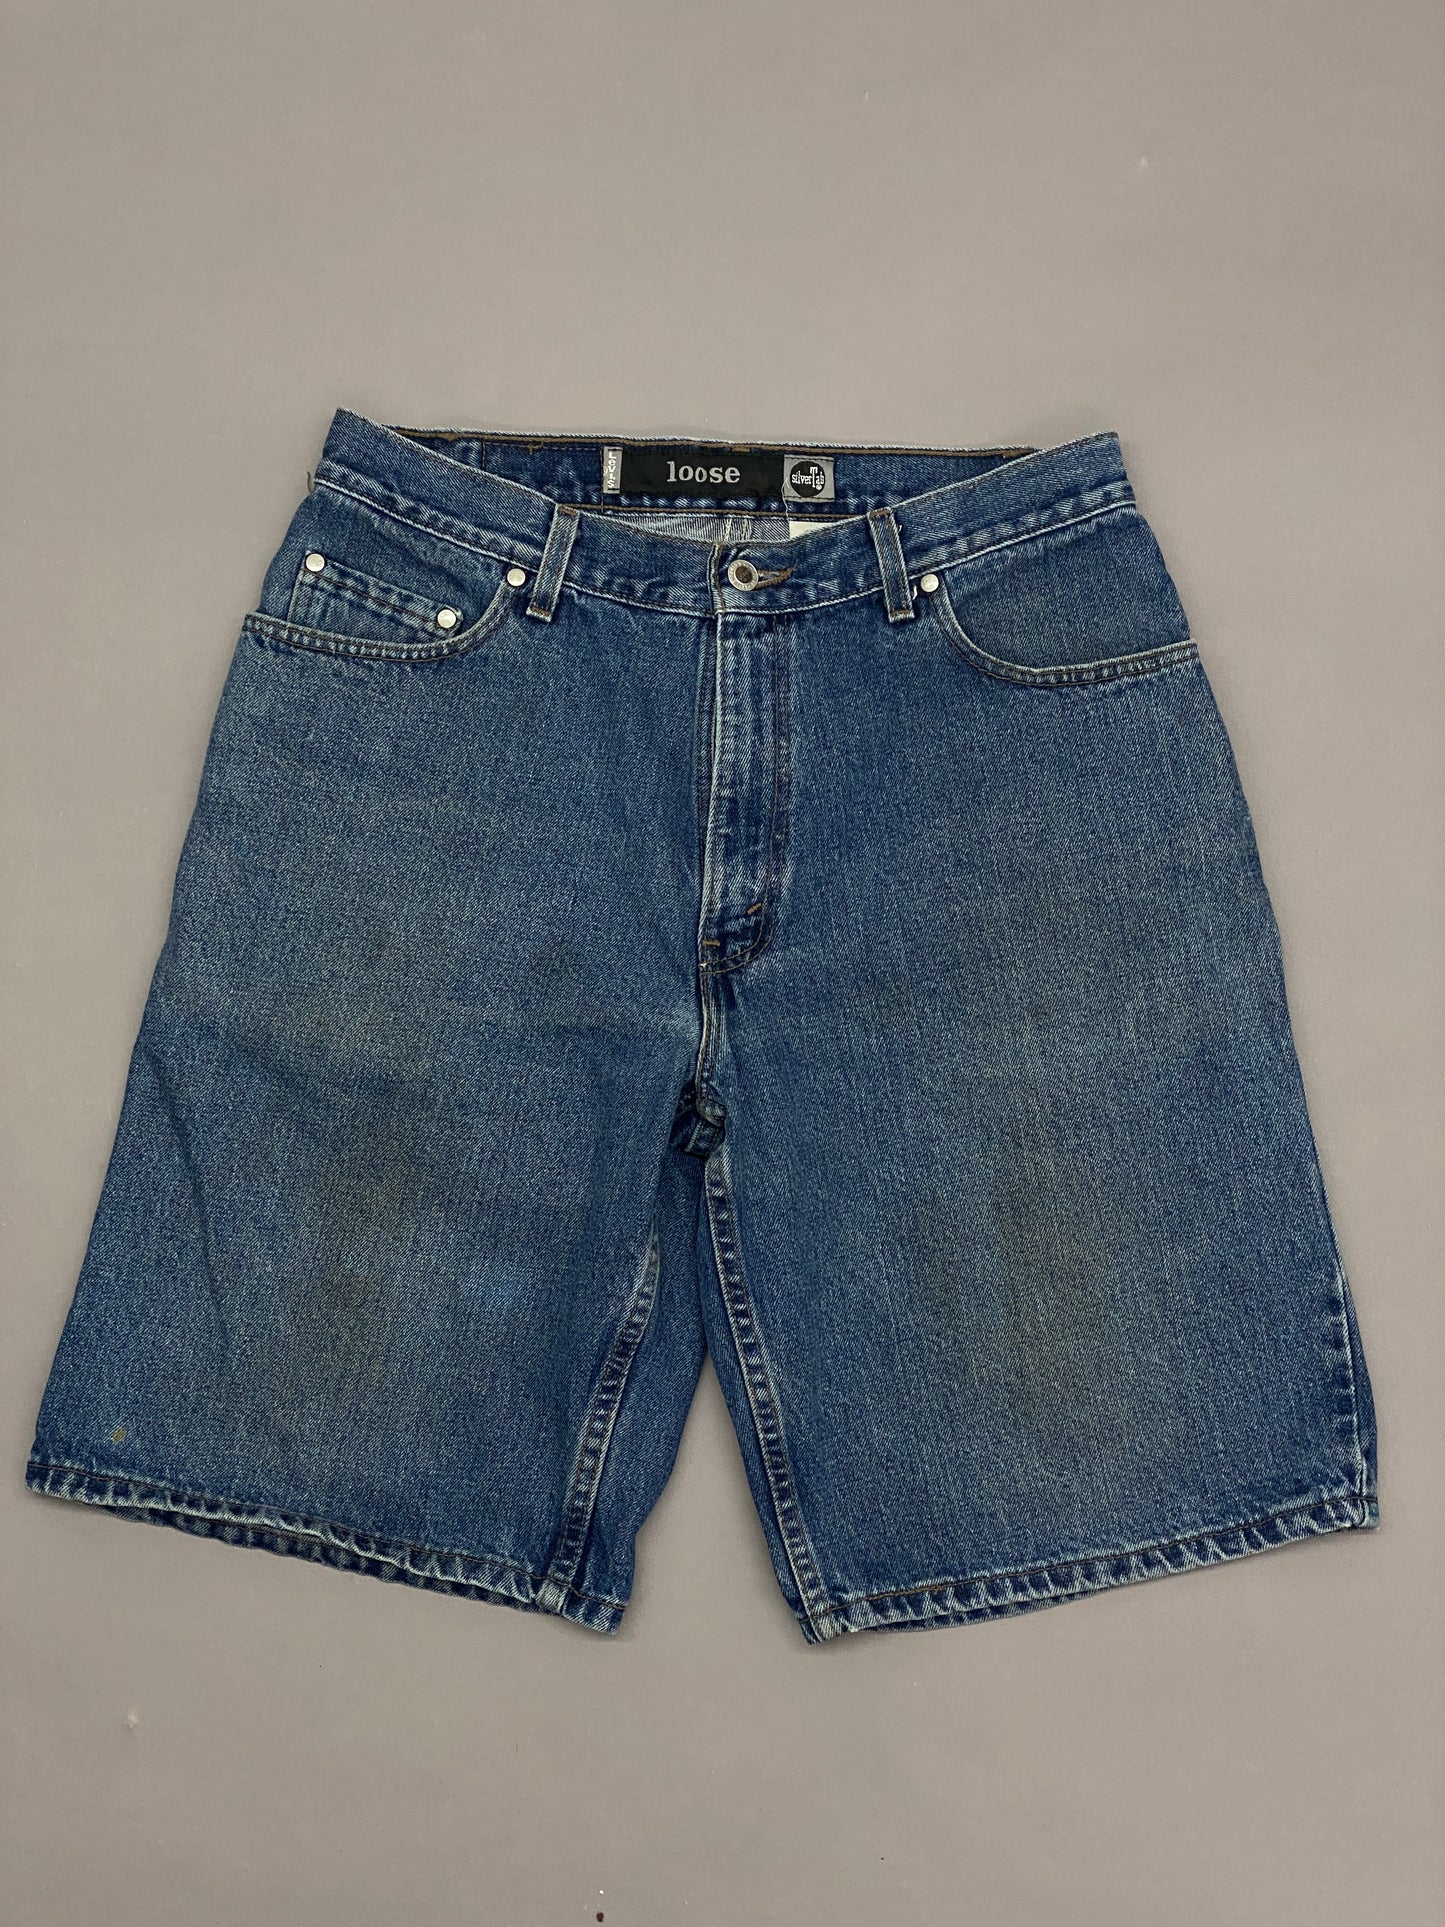 Shorts Baggy Levis Silver Tab Vintage - 33